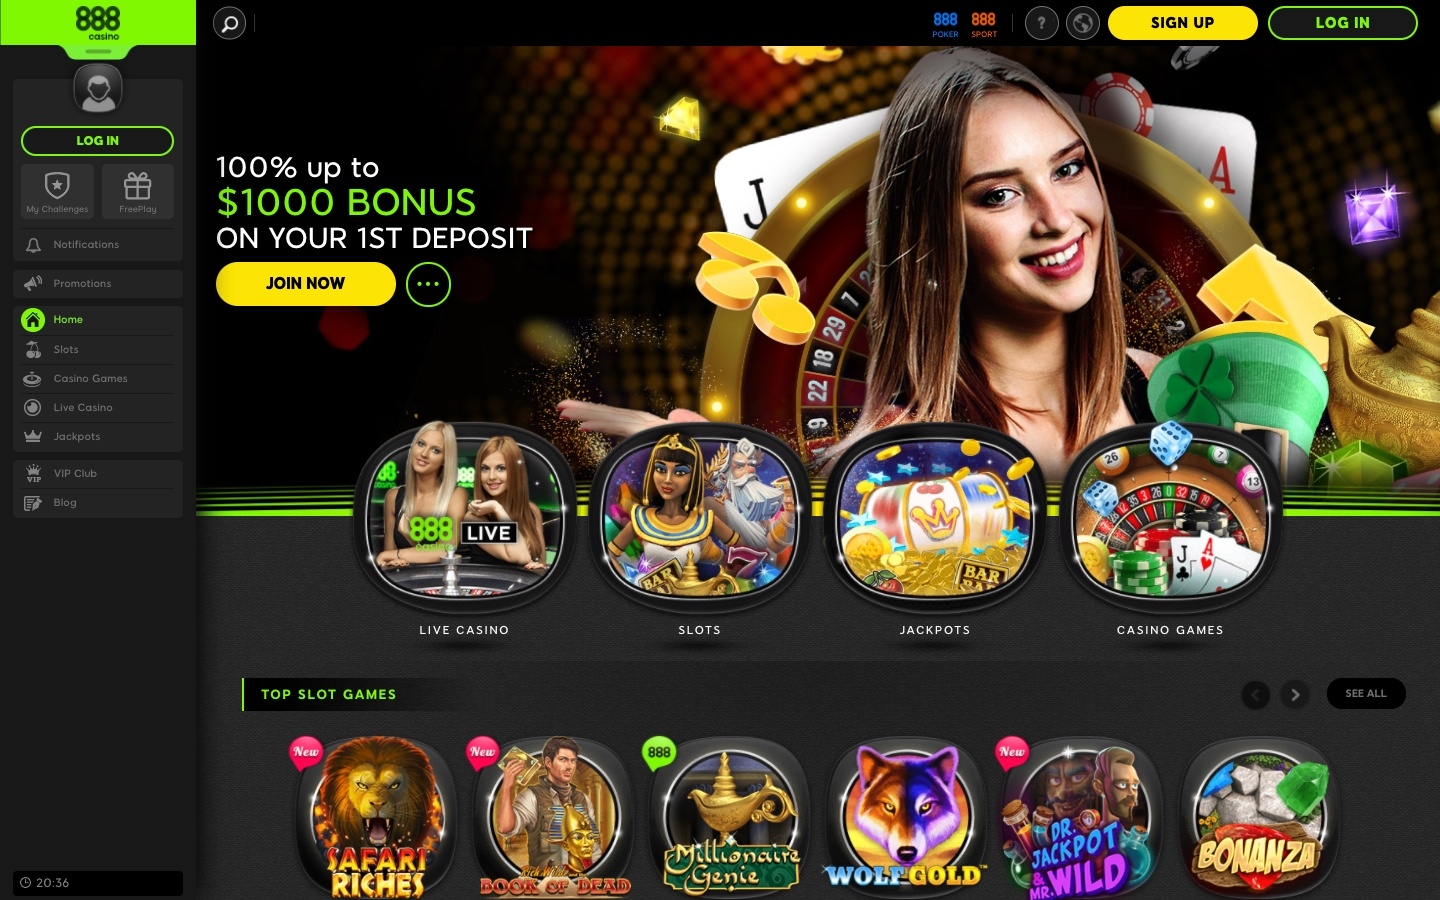 What Makes 888 Casino Stand Out From The Rest